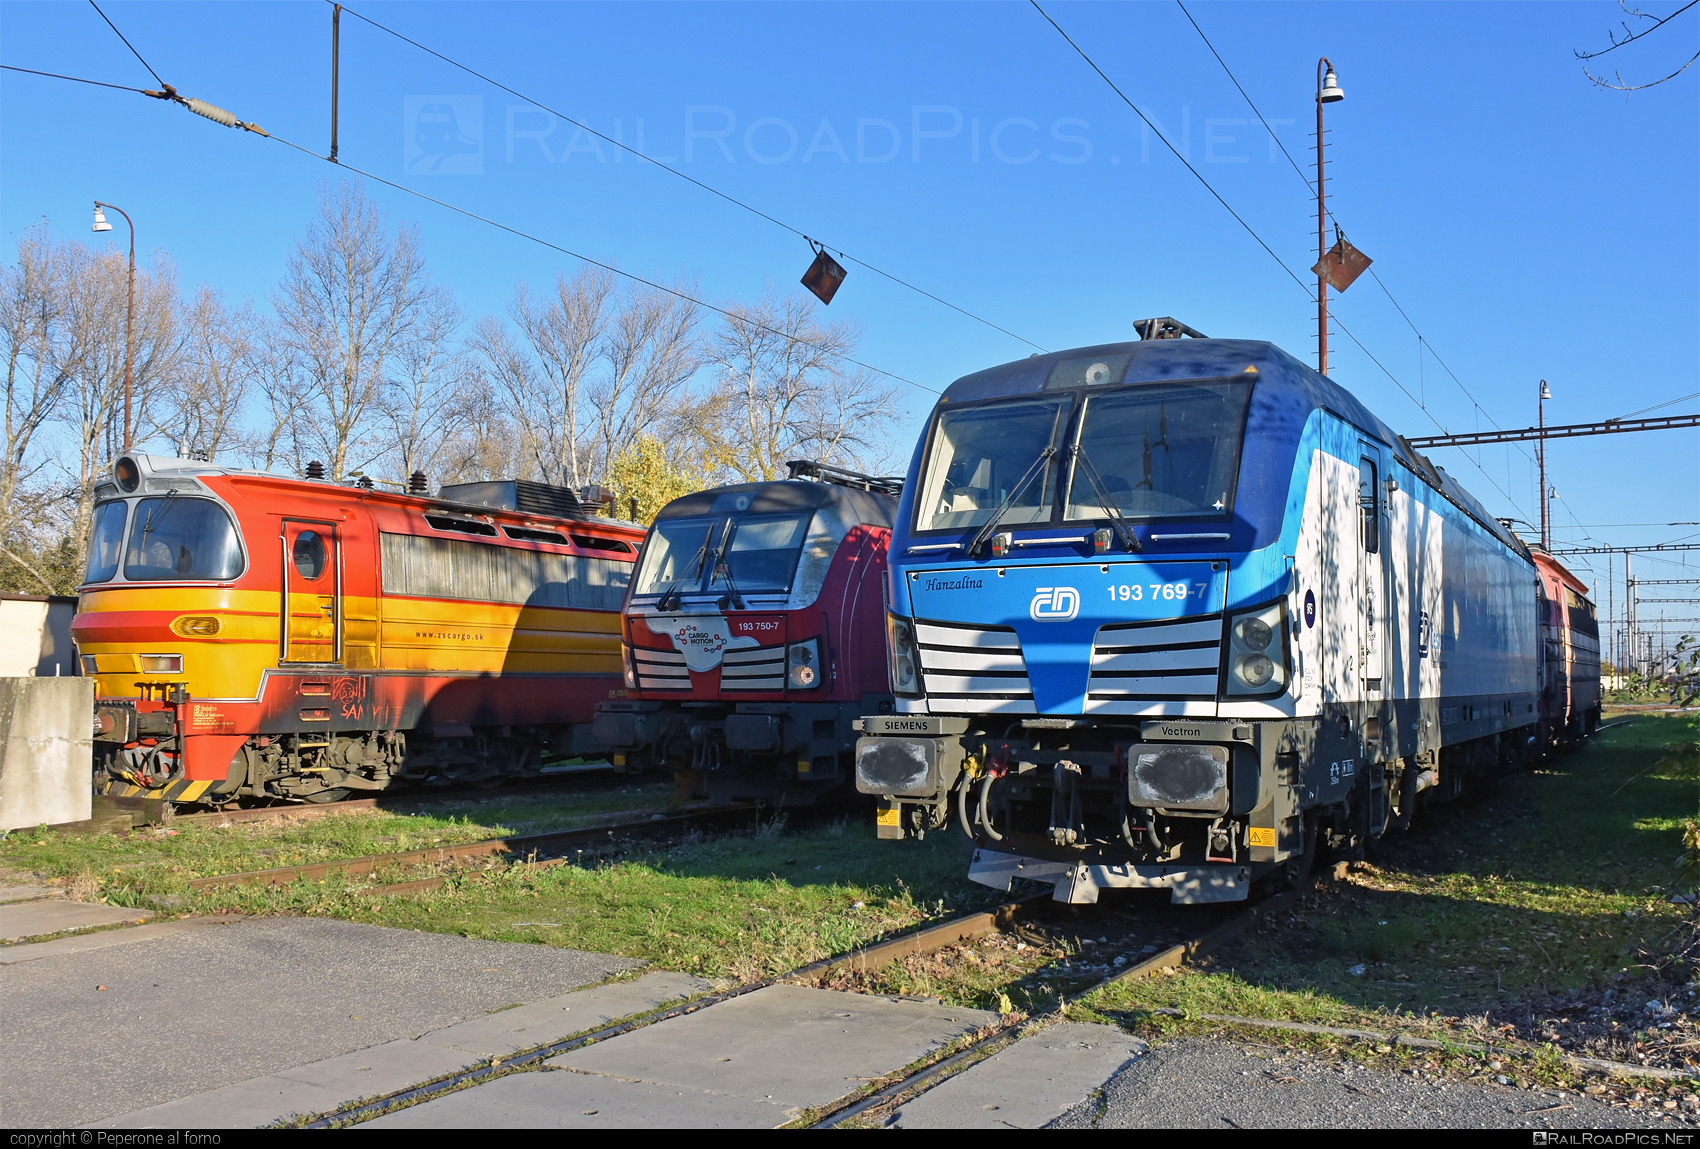 Siemens Vectron MS - 193 769-7 operated by ČD Cargo, a.s. #RollingStockLease #RollingStockLeaseSro #cdcargo #raill #siemens #siemensVectron #siemensVectronMS #vectron #vectronMS